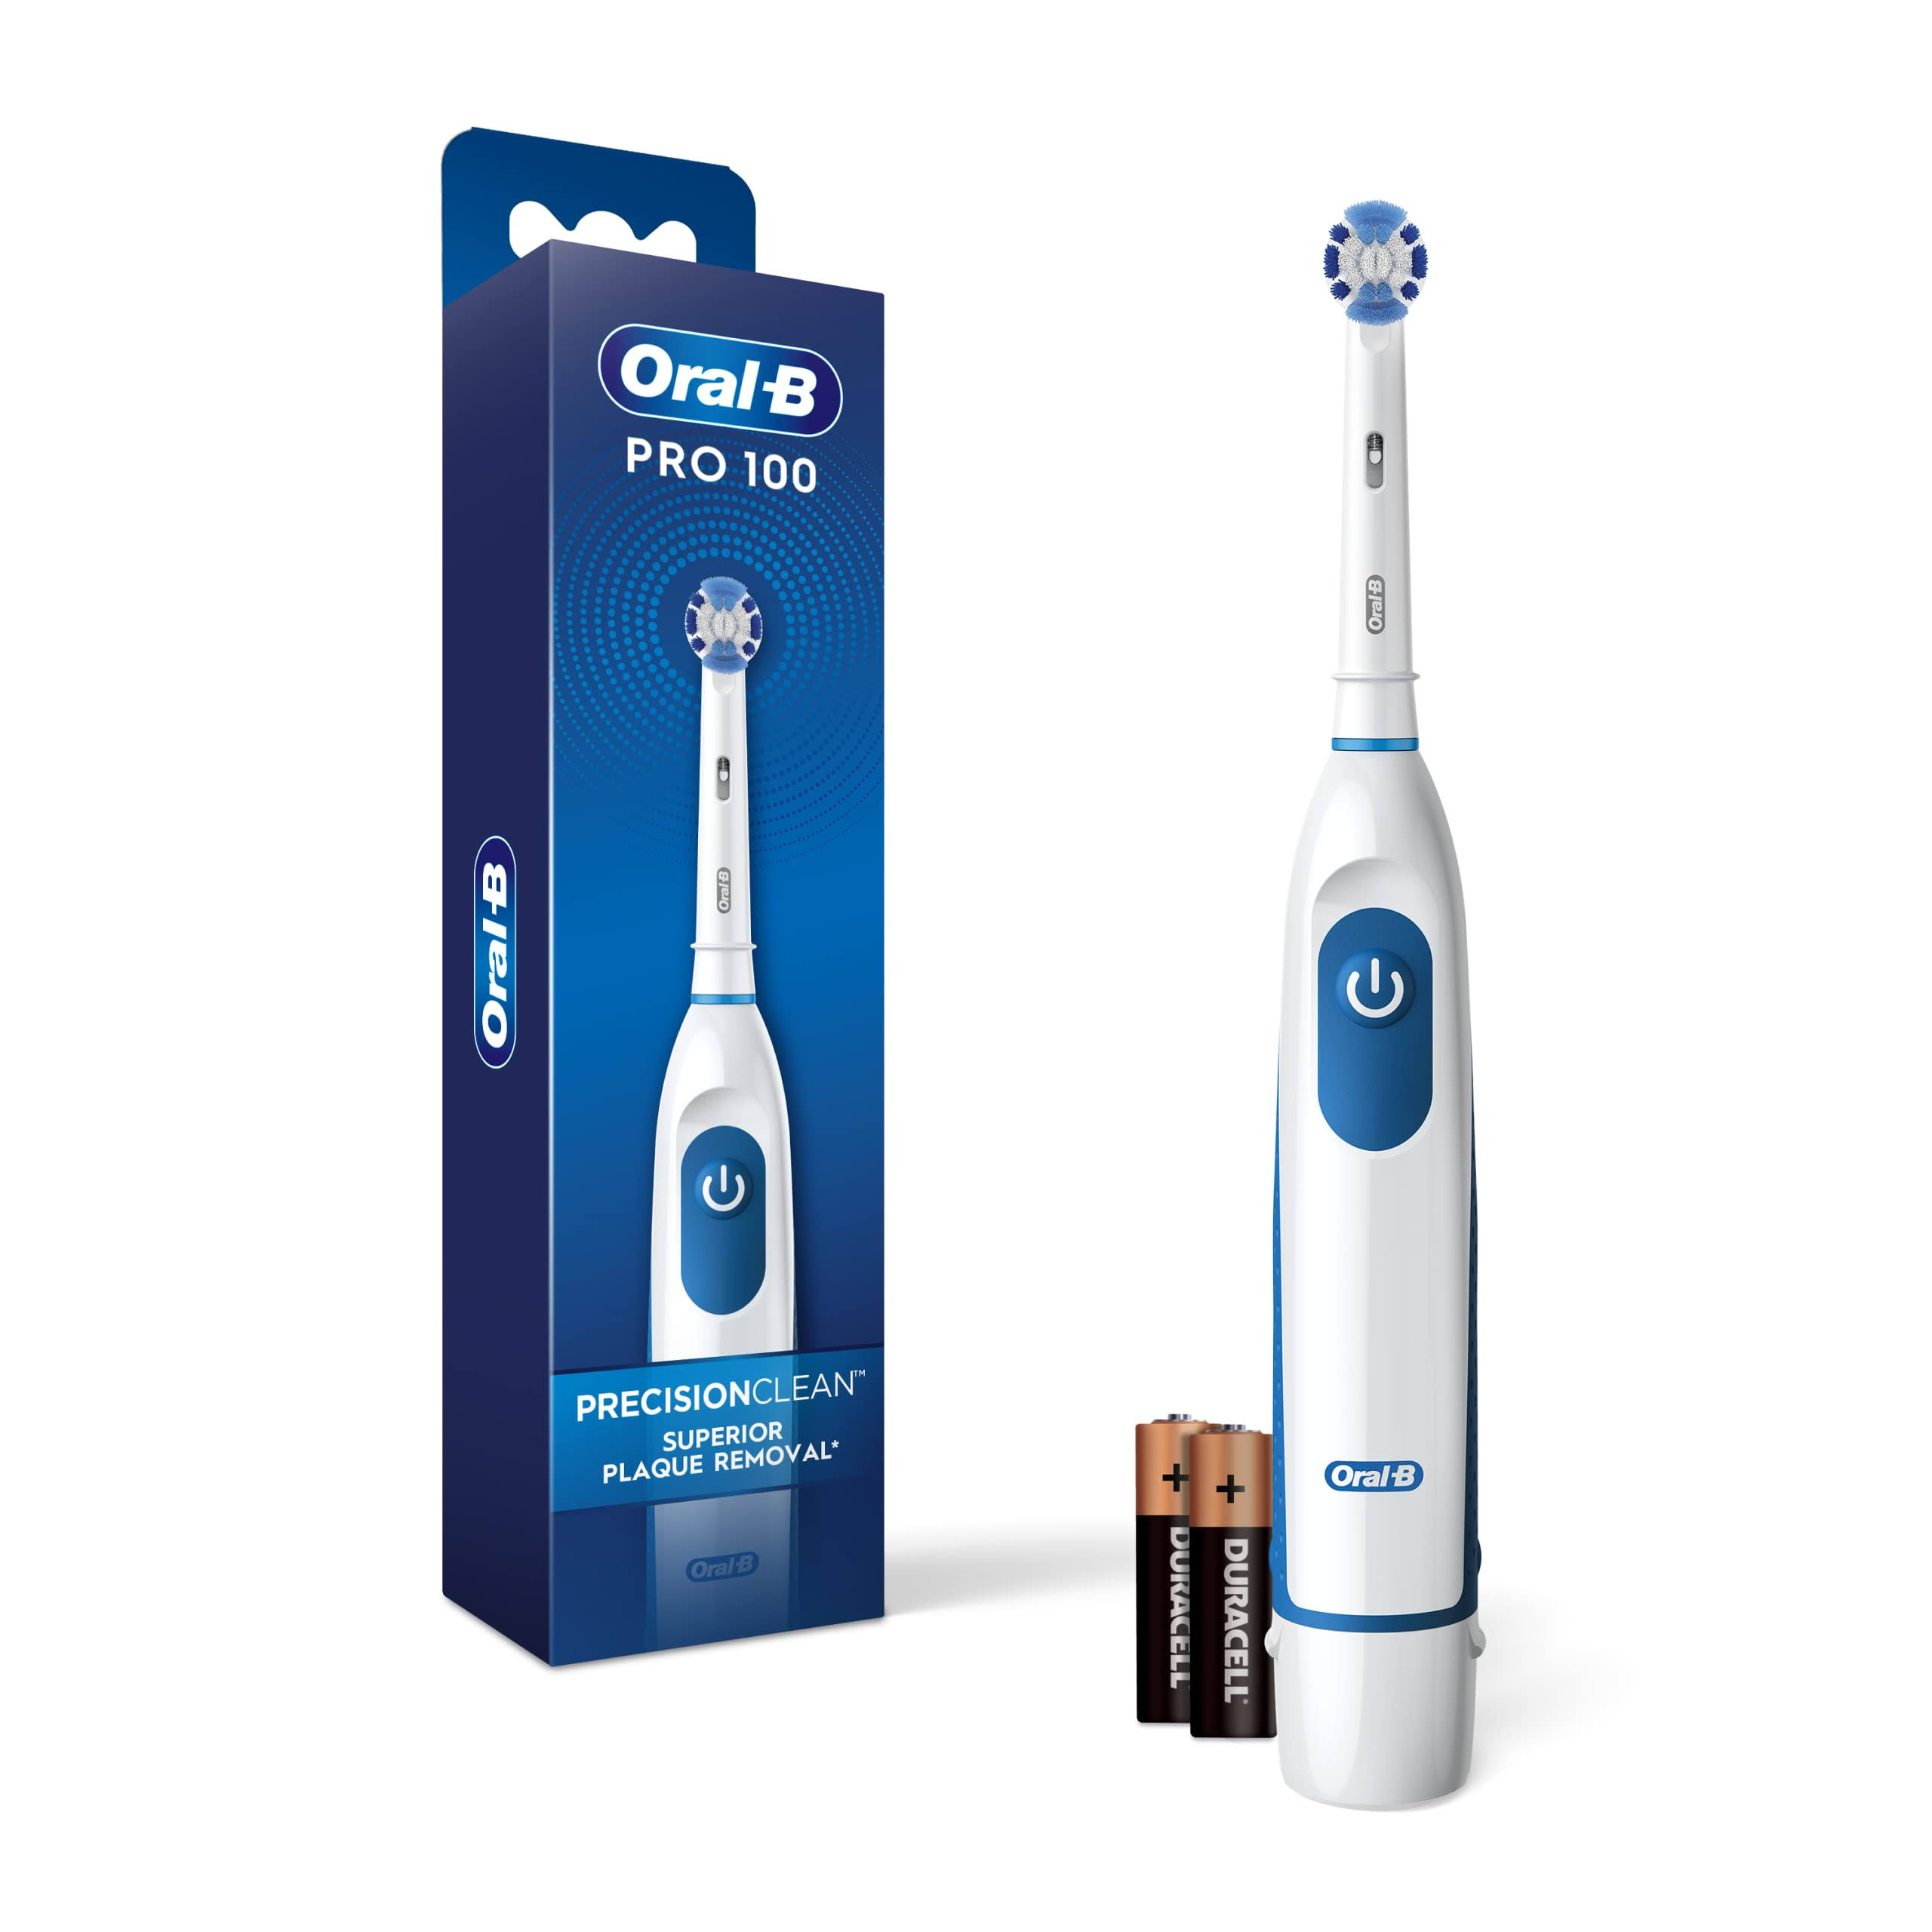 Oral B Pro 100 Precision Clean, Battery Power Toothbrush, White